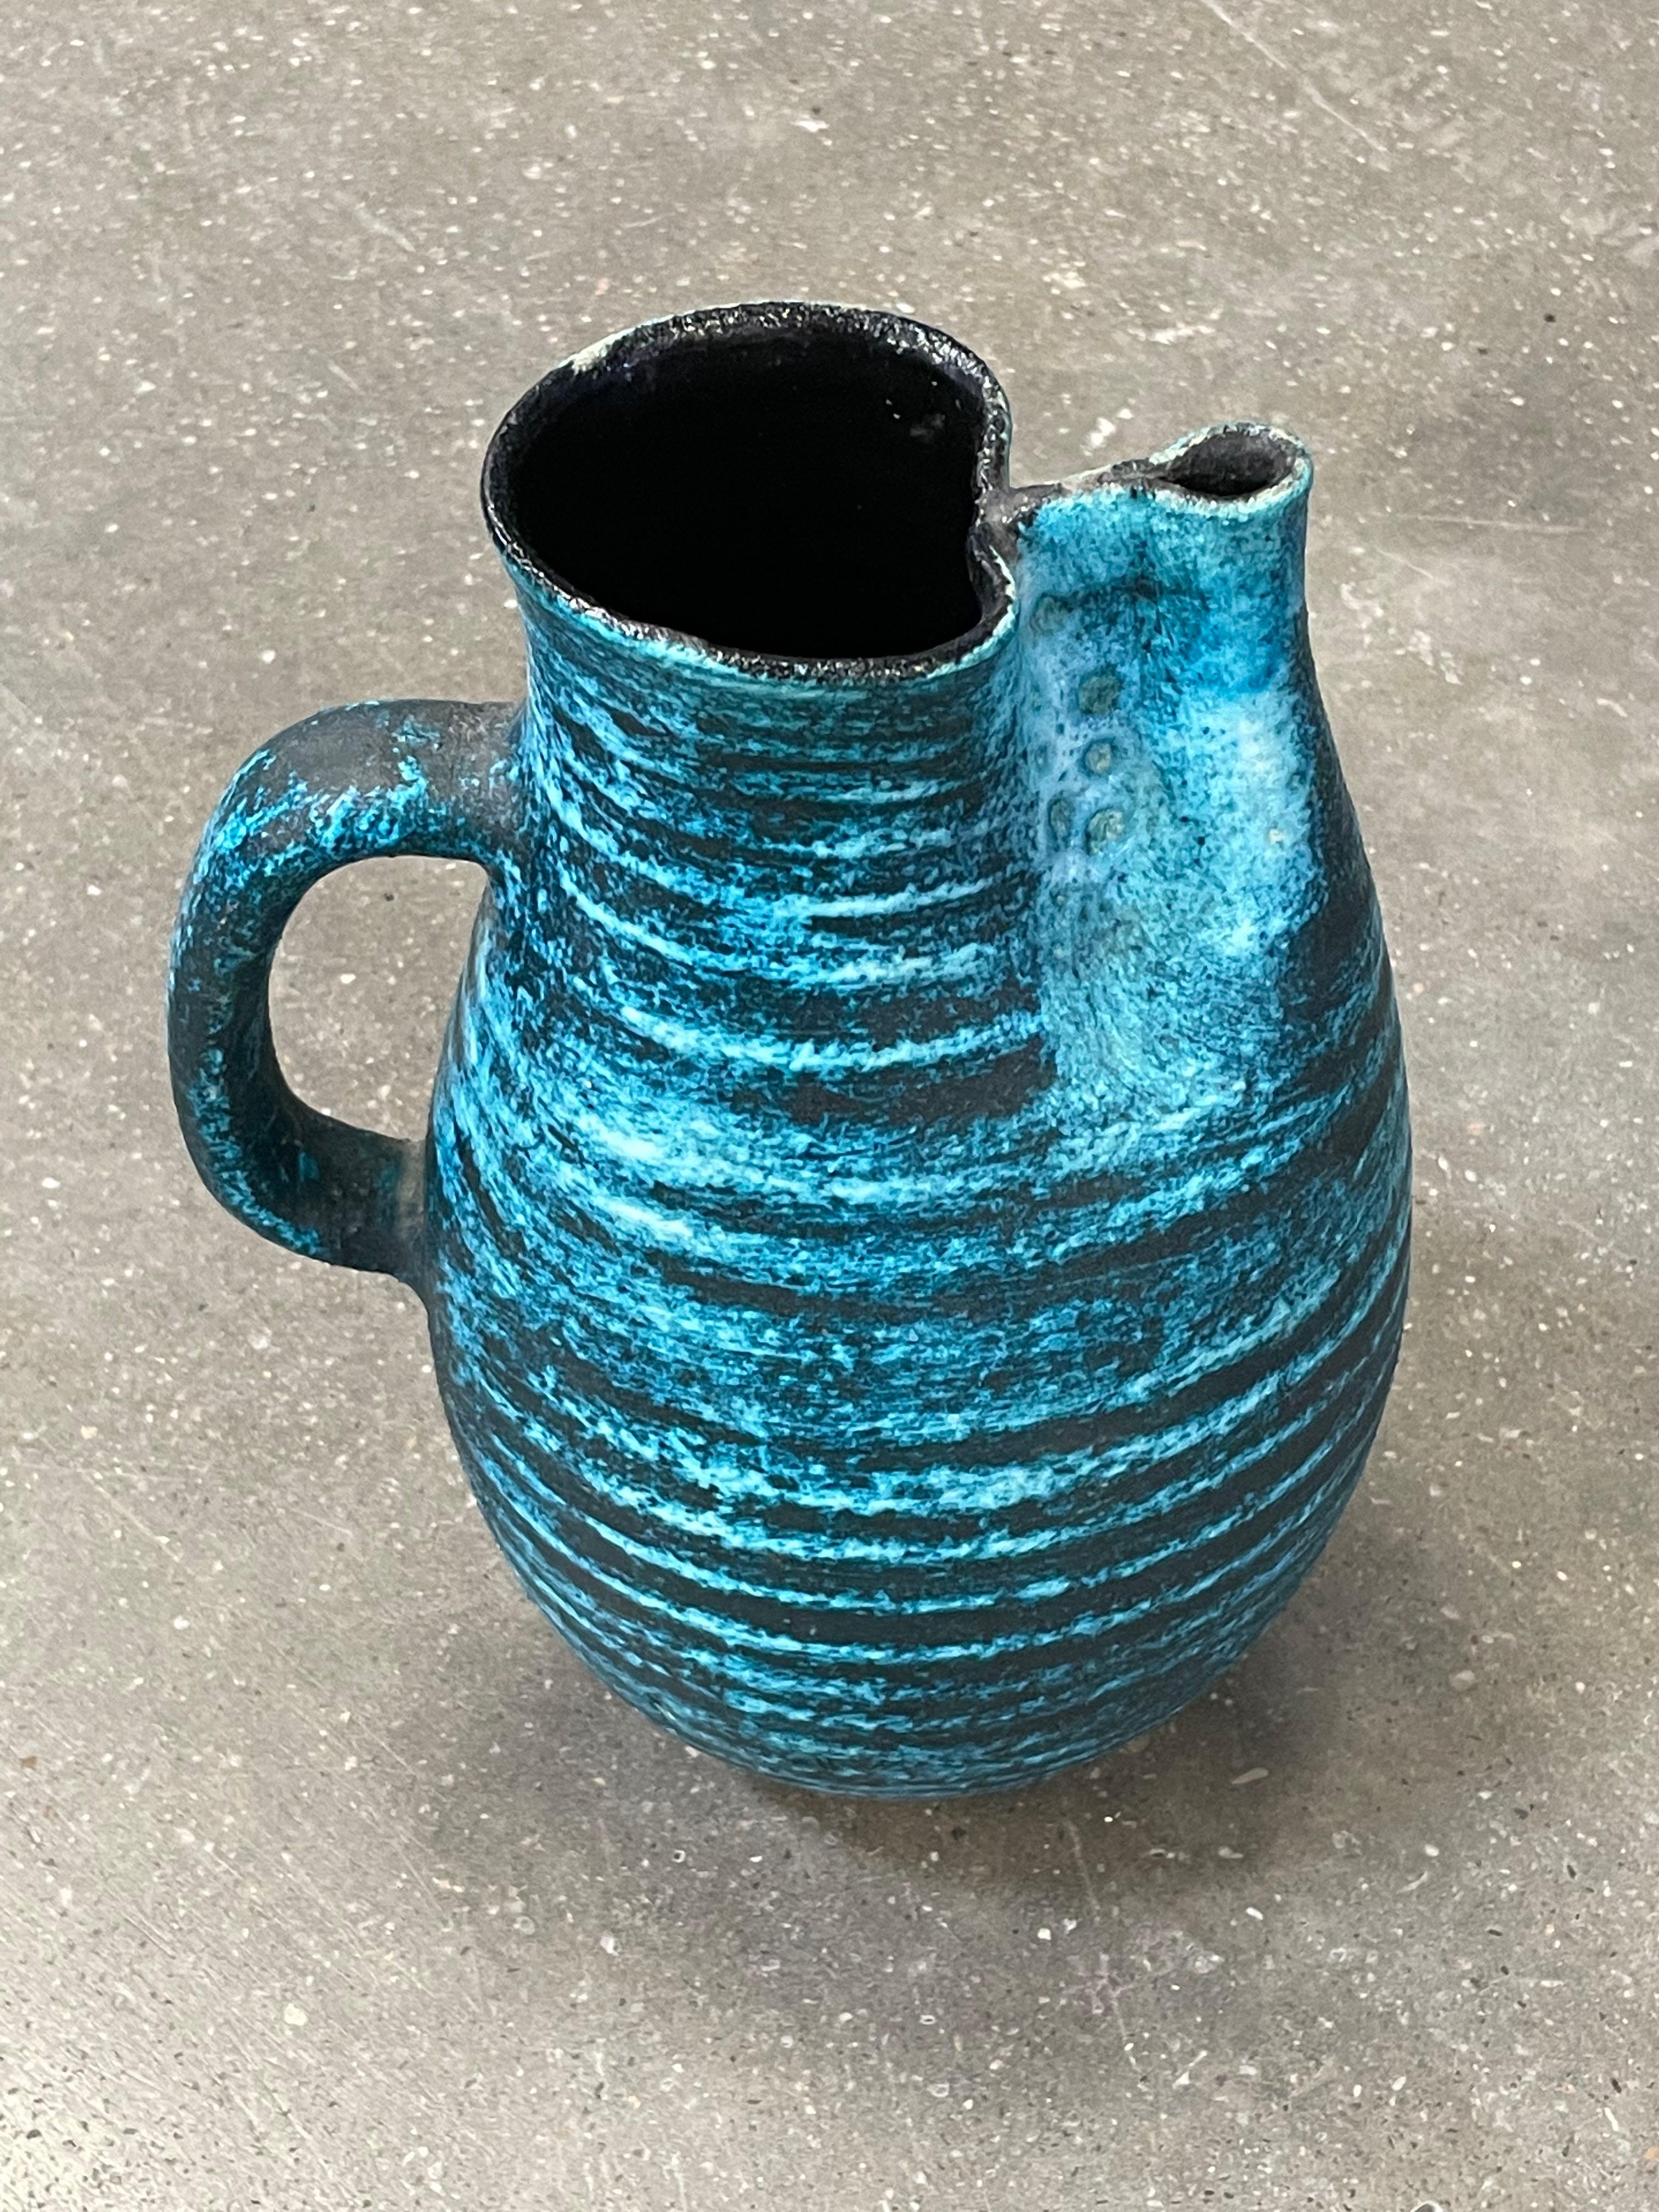 Mid Century French horizontal stripe deep turquoise and charcoal vase by Accolay.
Accolay pottery was hand made in Accolay, France from 1945 to 1989. 
From a collection of four pieces (S6180/2/3 )
